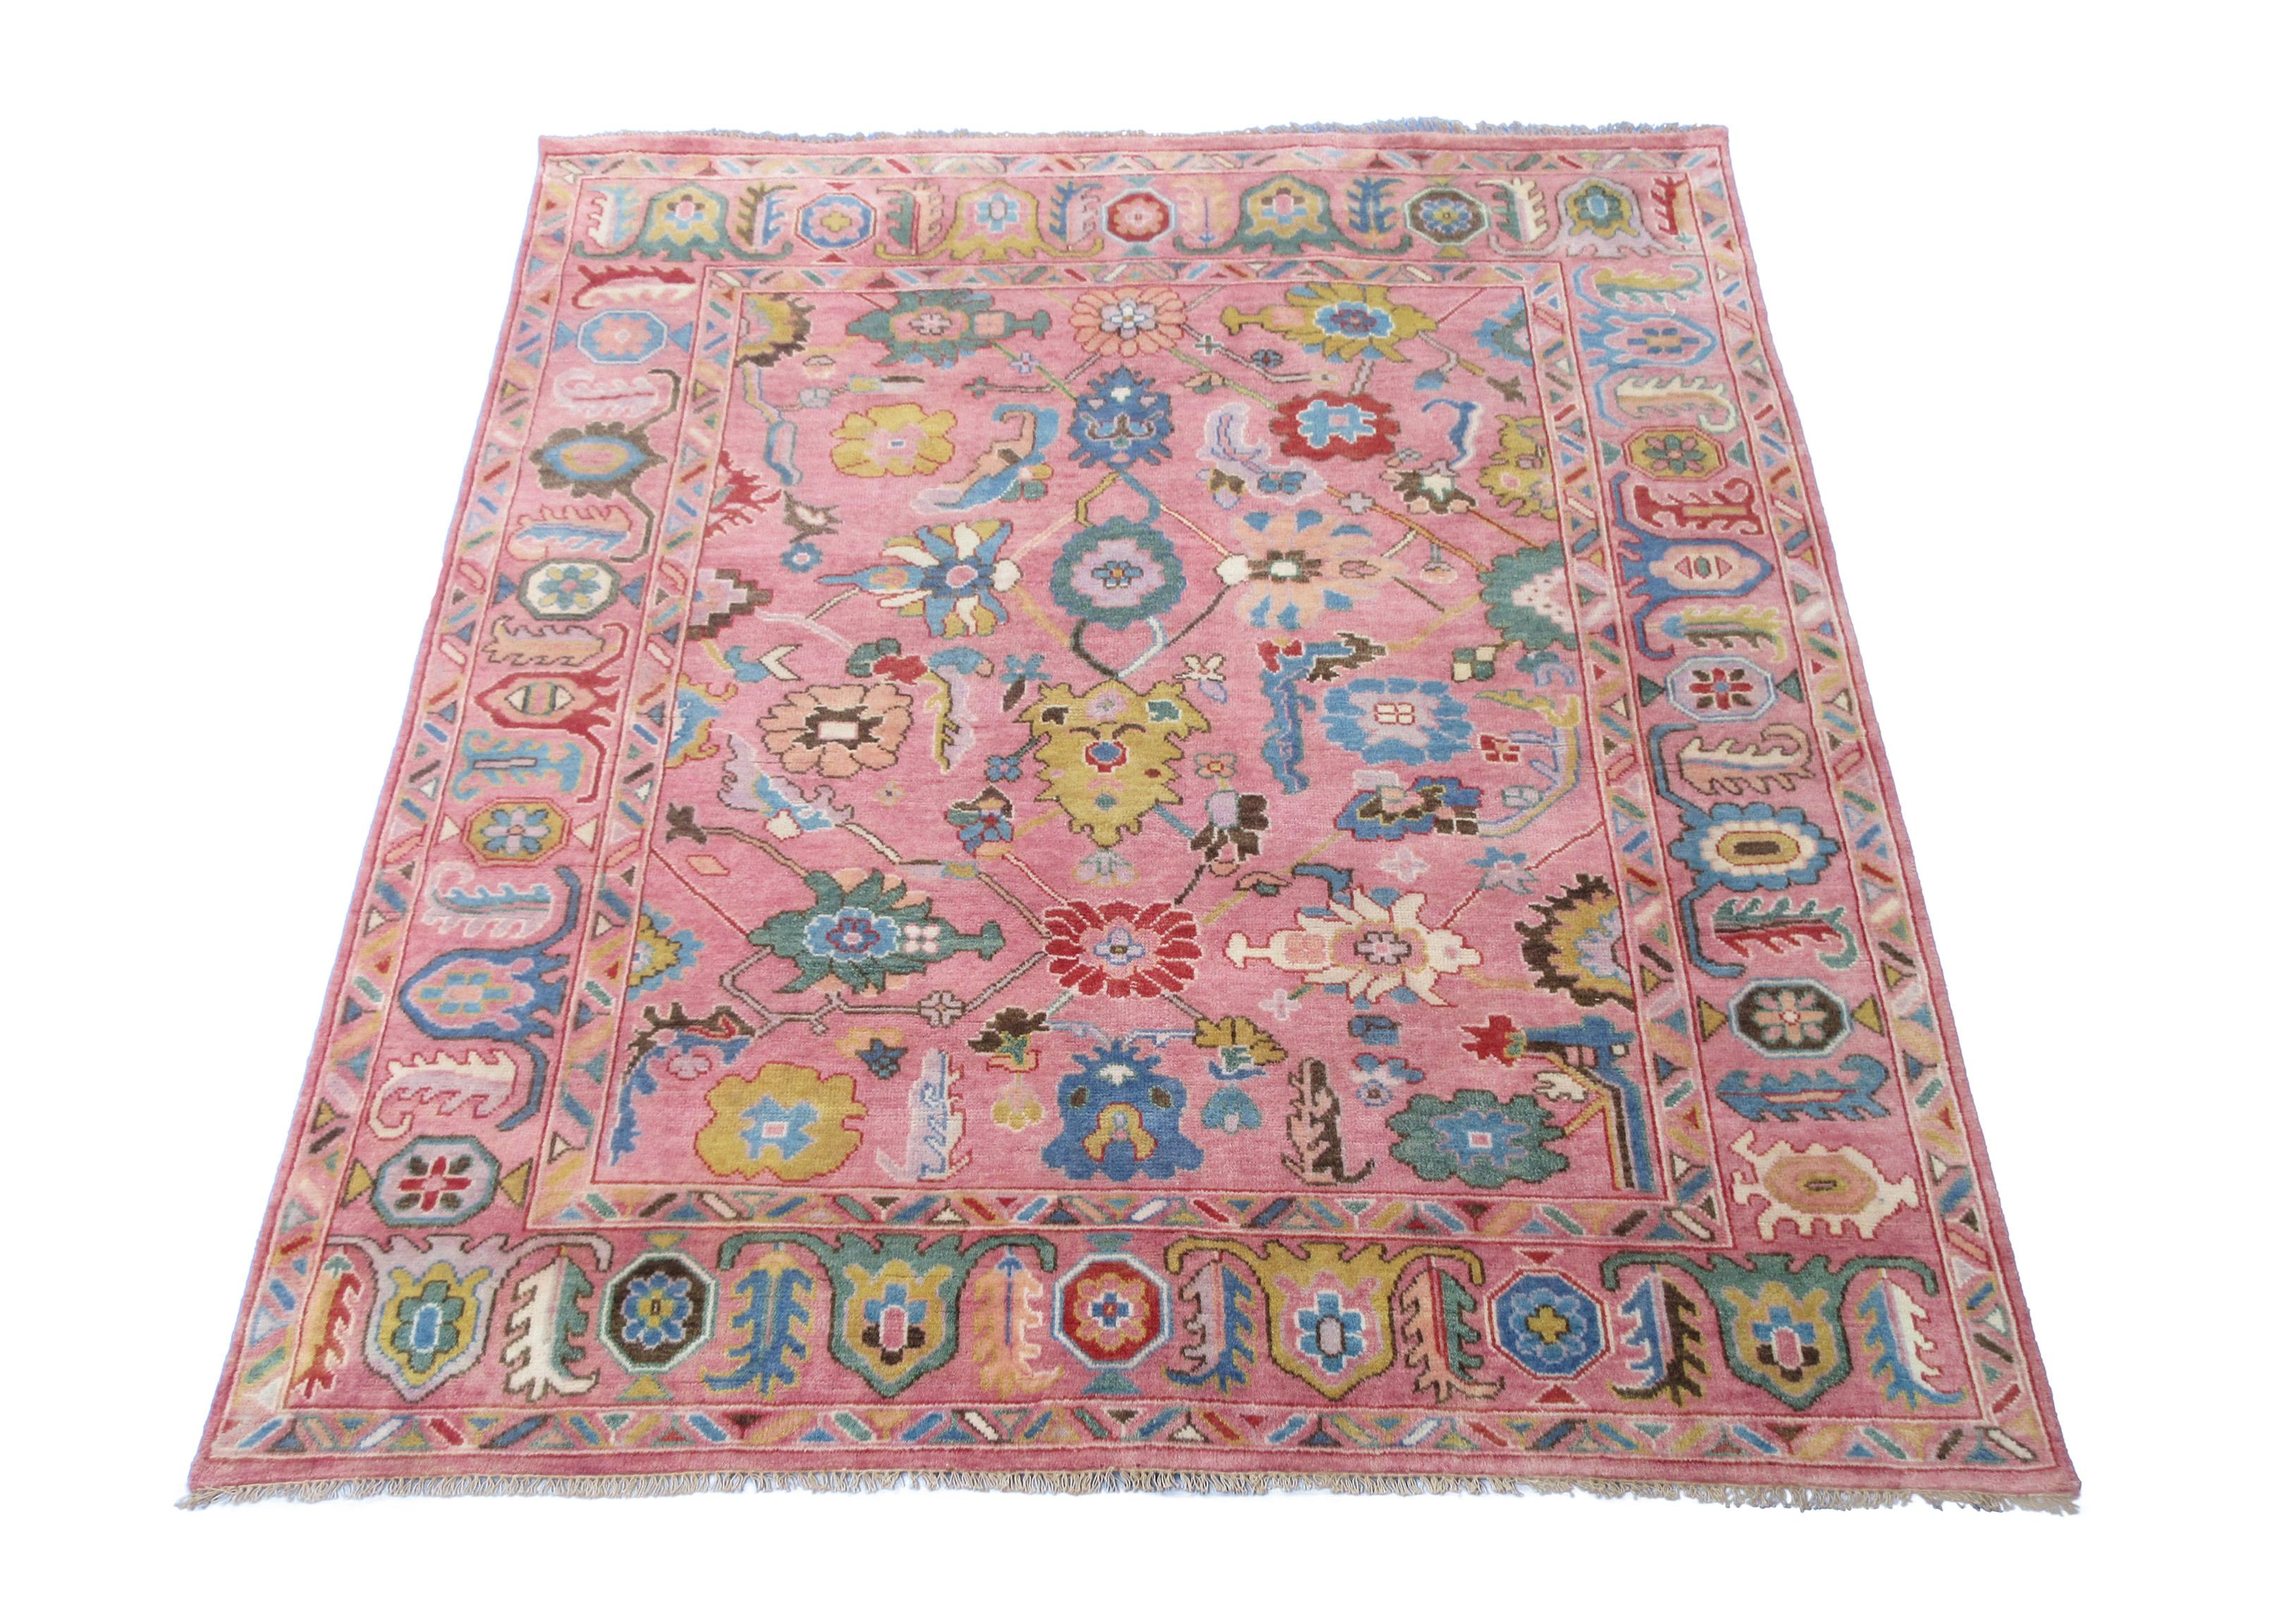 Hand-knotted, wool pile on a cotton foundation.

Approximately: 10' x 14'
Please contact us for exact sizes.

Origin: India

Field Color: Pink

Border Color: Pink

Accent Colors: Red, Green, Blue, Ivory, Brown